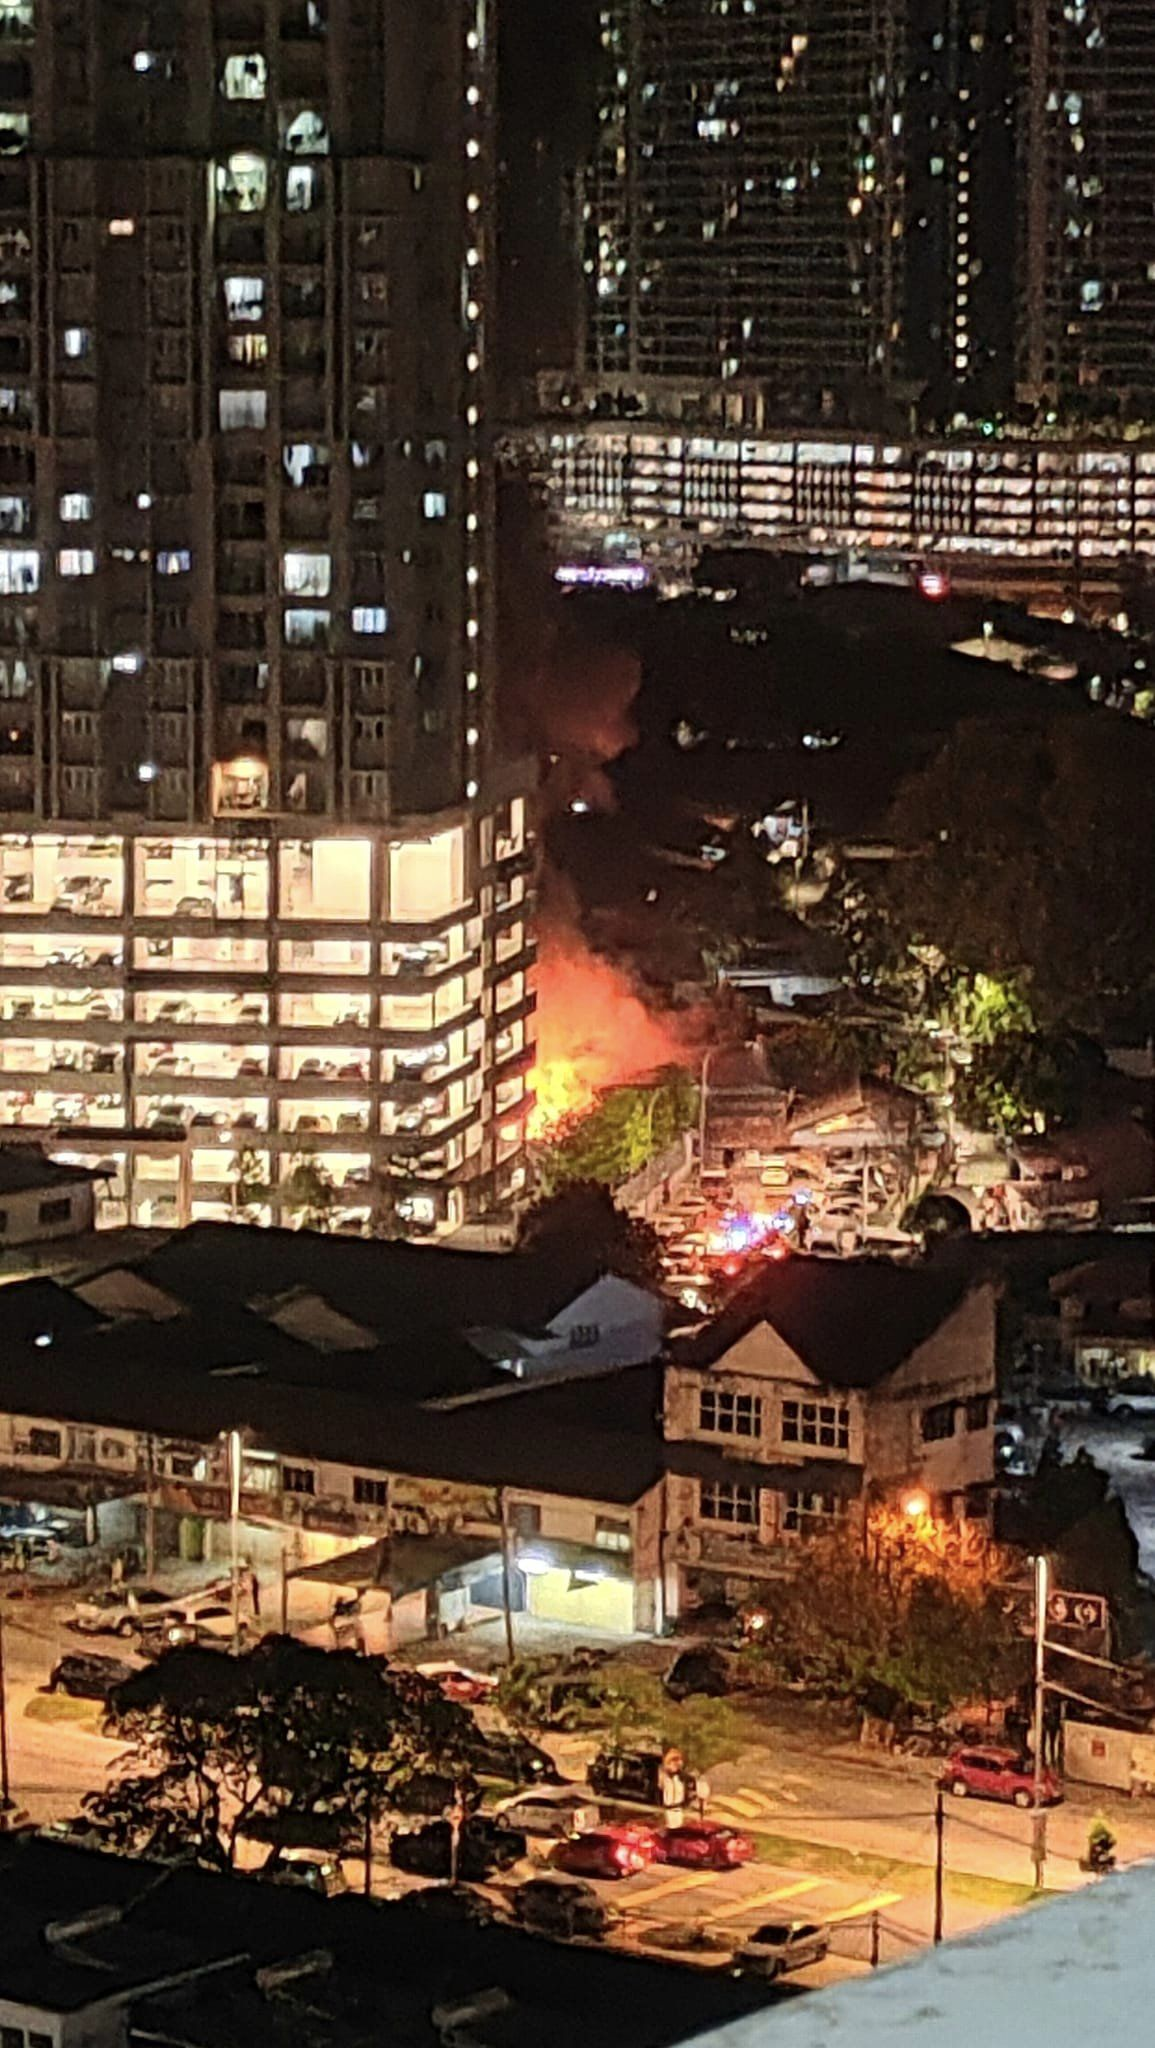 Fire engulfs 2 houses in setapak at midnight, 1 woman sustains burns to her face | weirdkaya